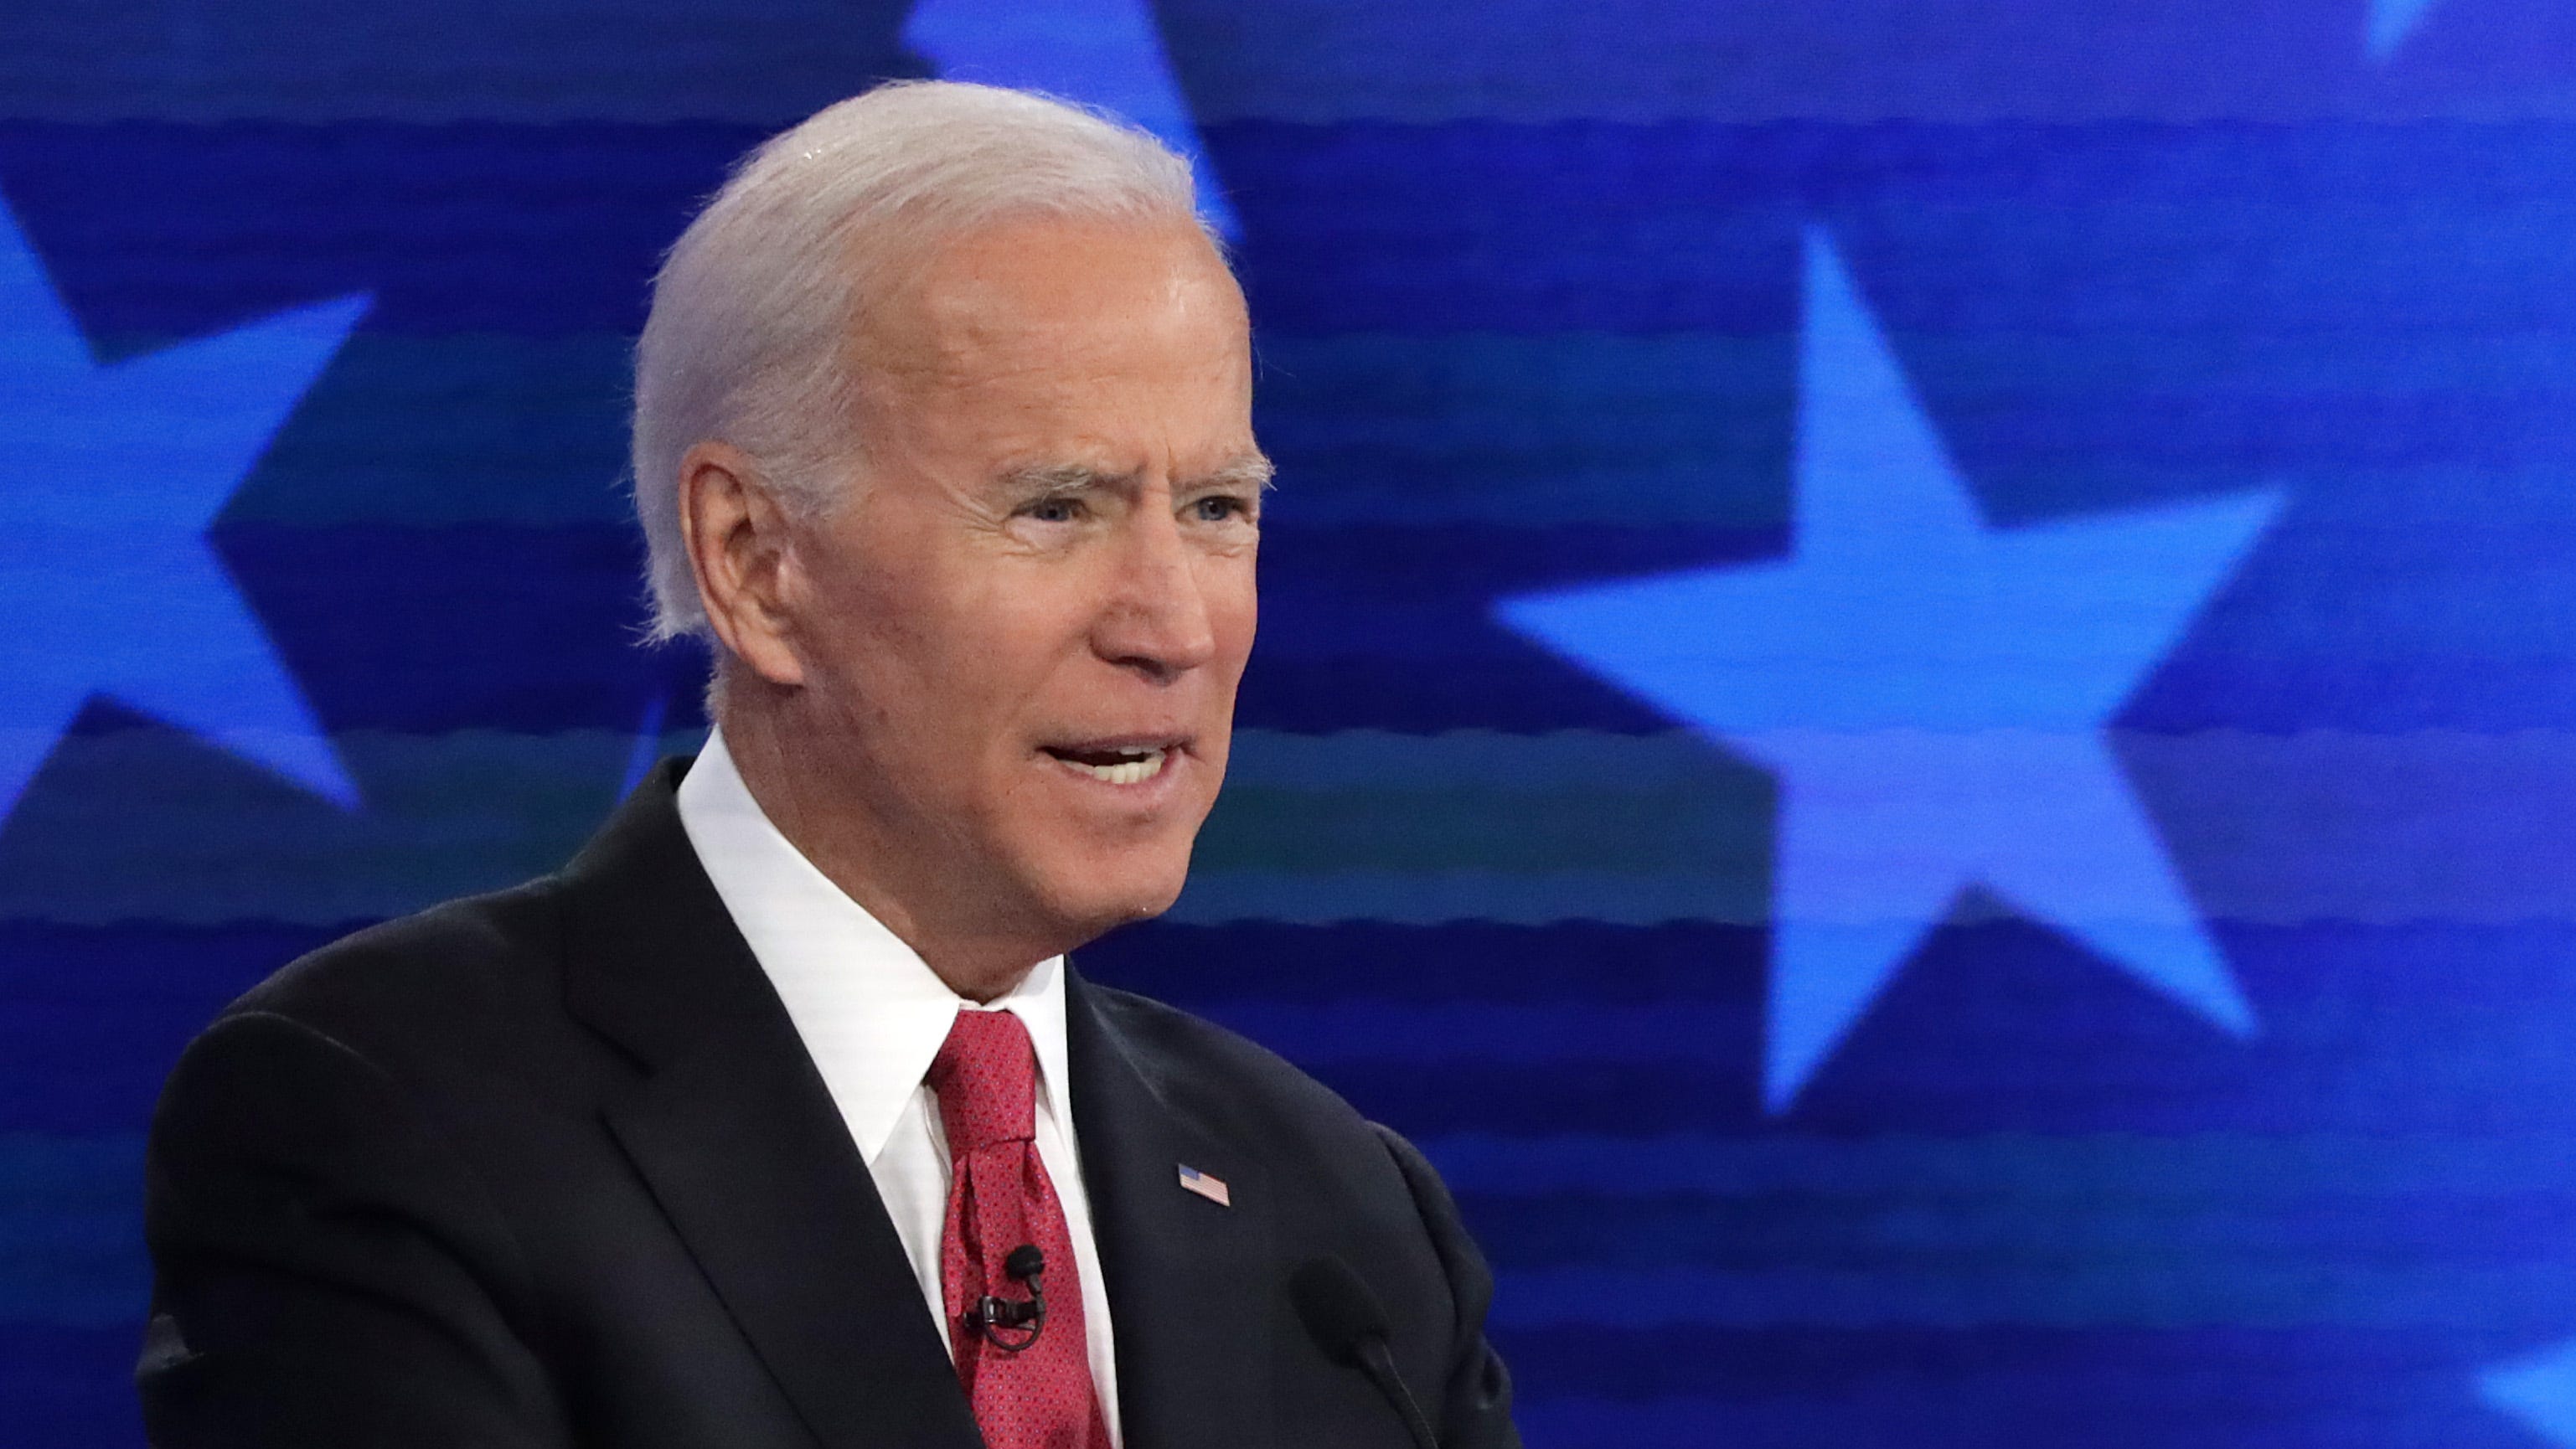 Biden is letting Trump beat him on corruption, Hunter and impeachment